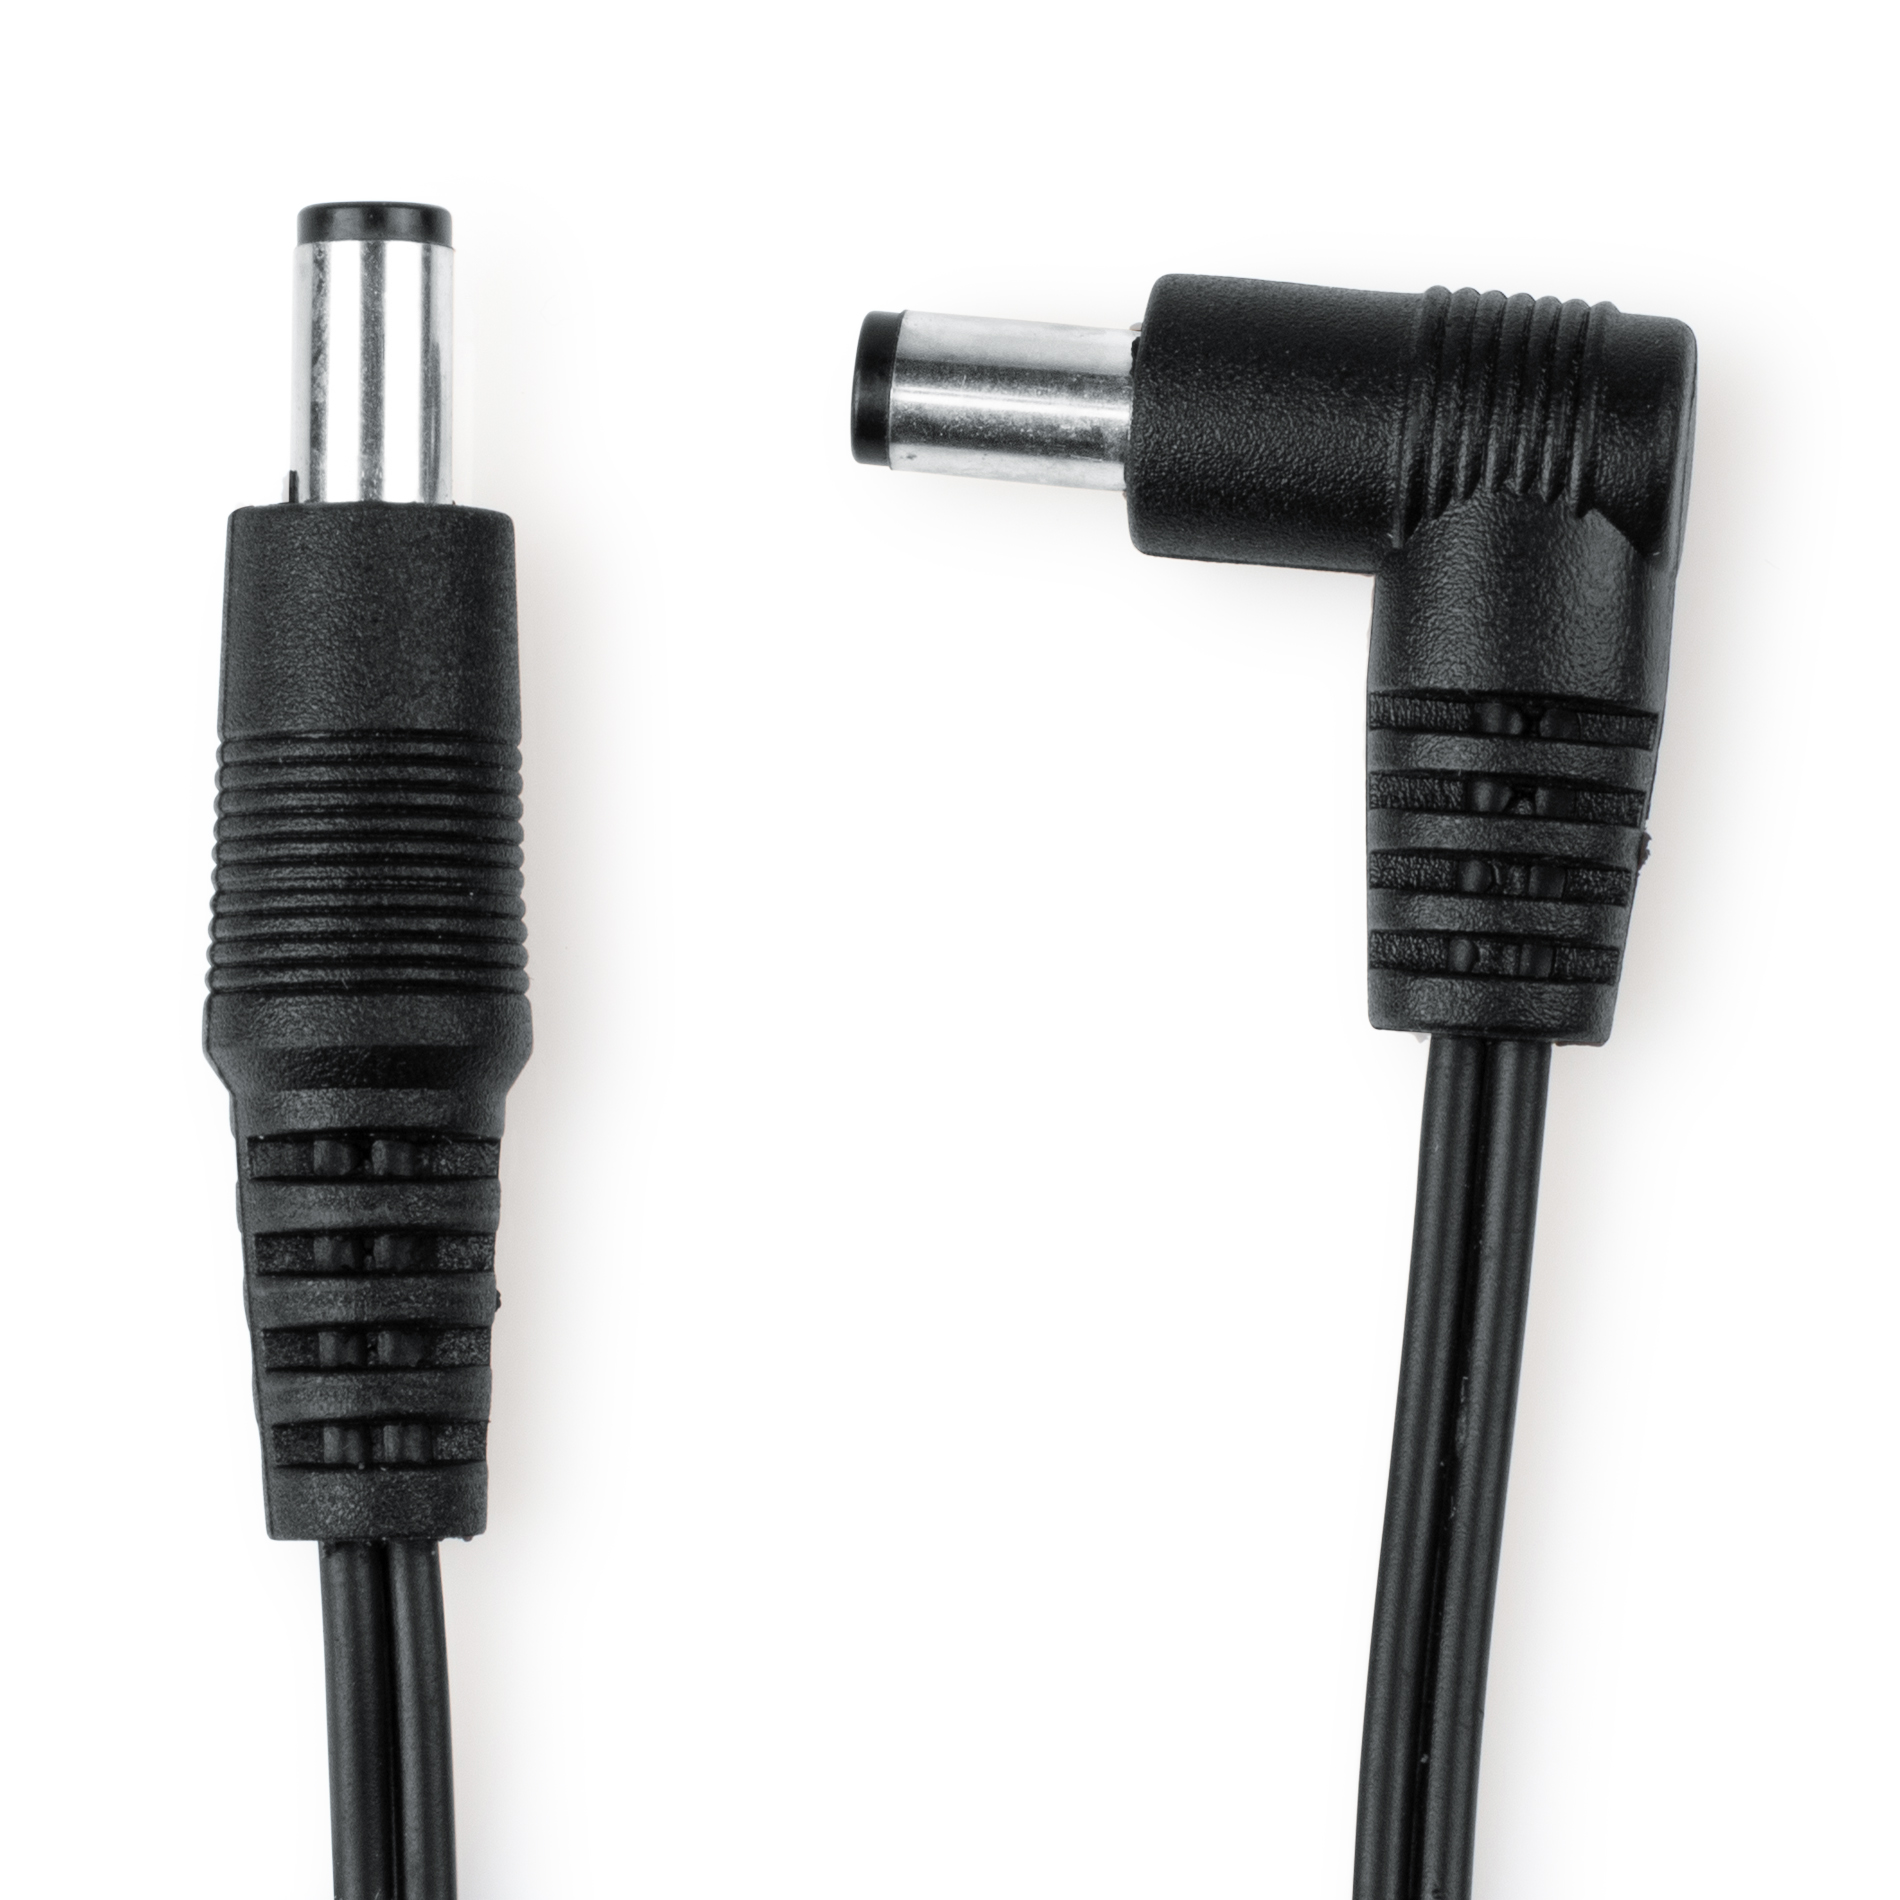 Single DC Power Cable for Pedals – 20″ Long-GTR-PWR-DCP20